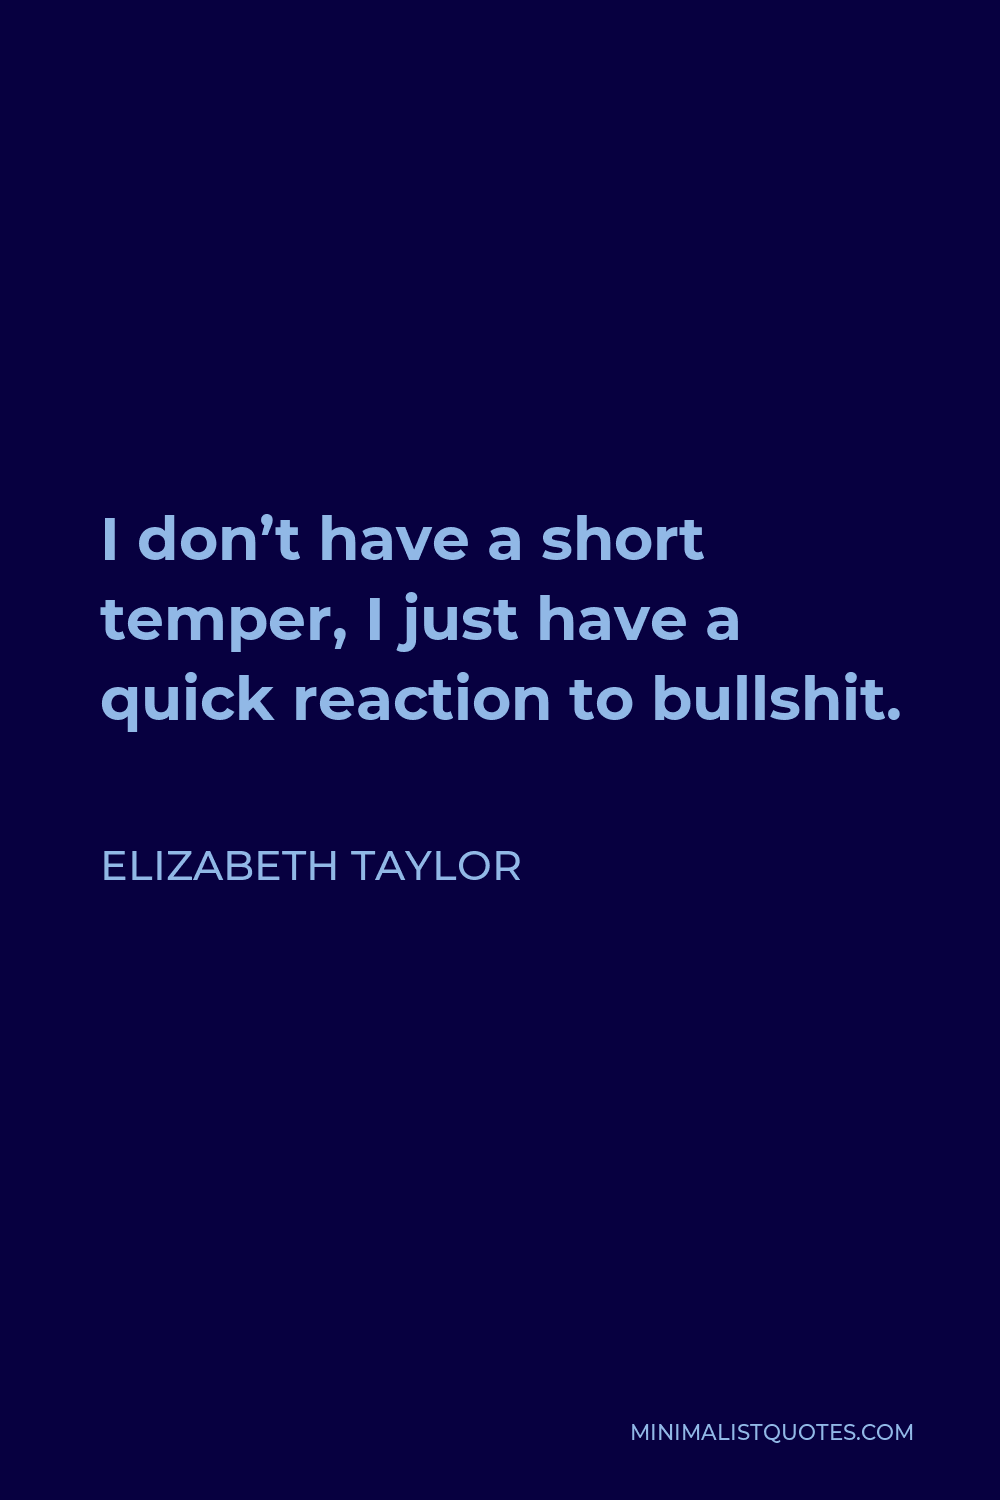 Elizabeth Taylor Quote - I don’t have a short temper, I just have a quick reaction to bullshit.